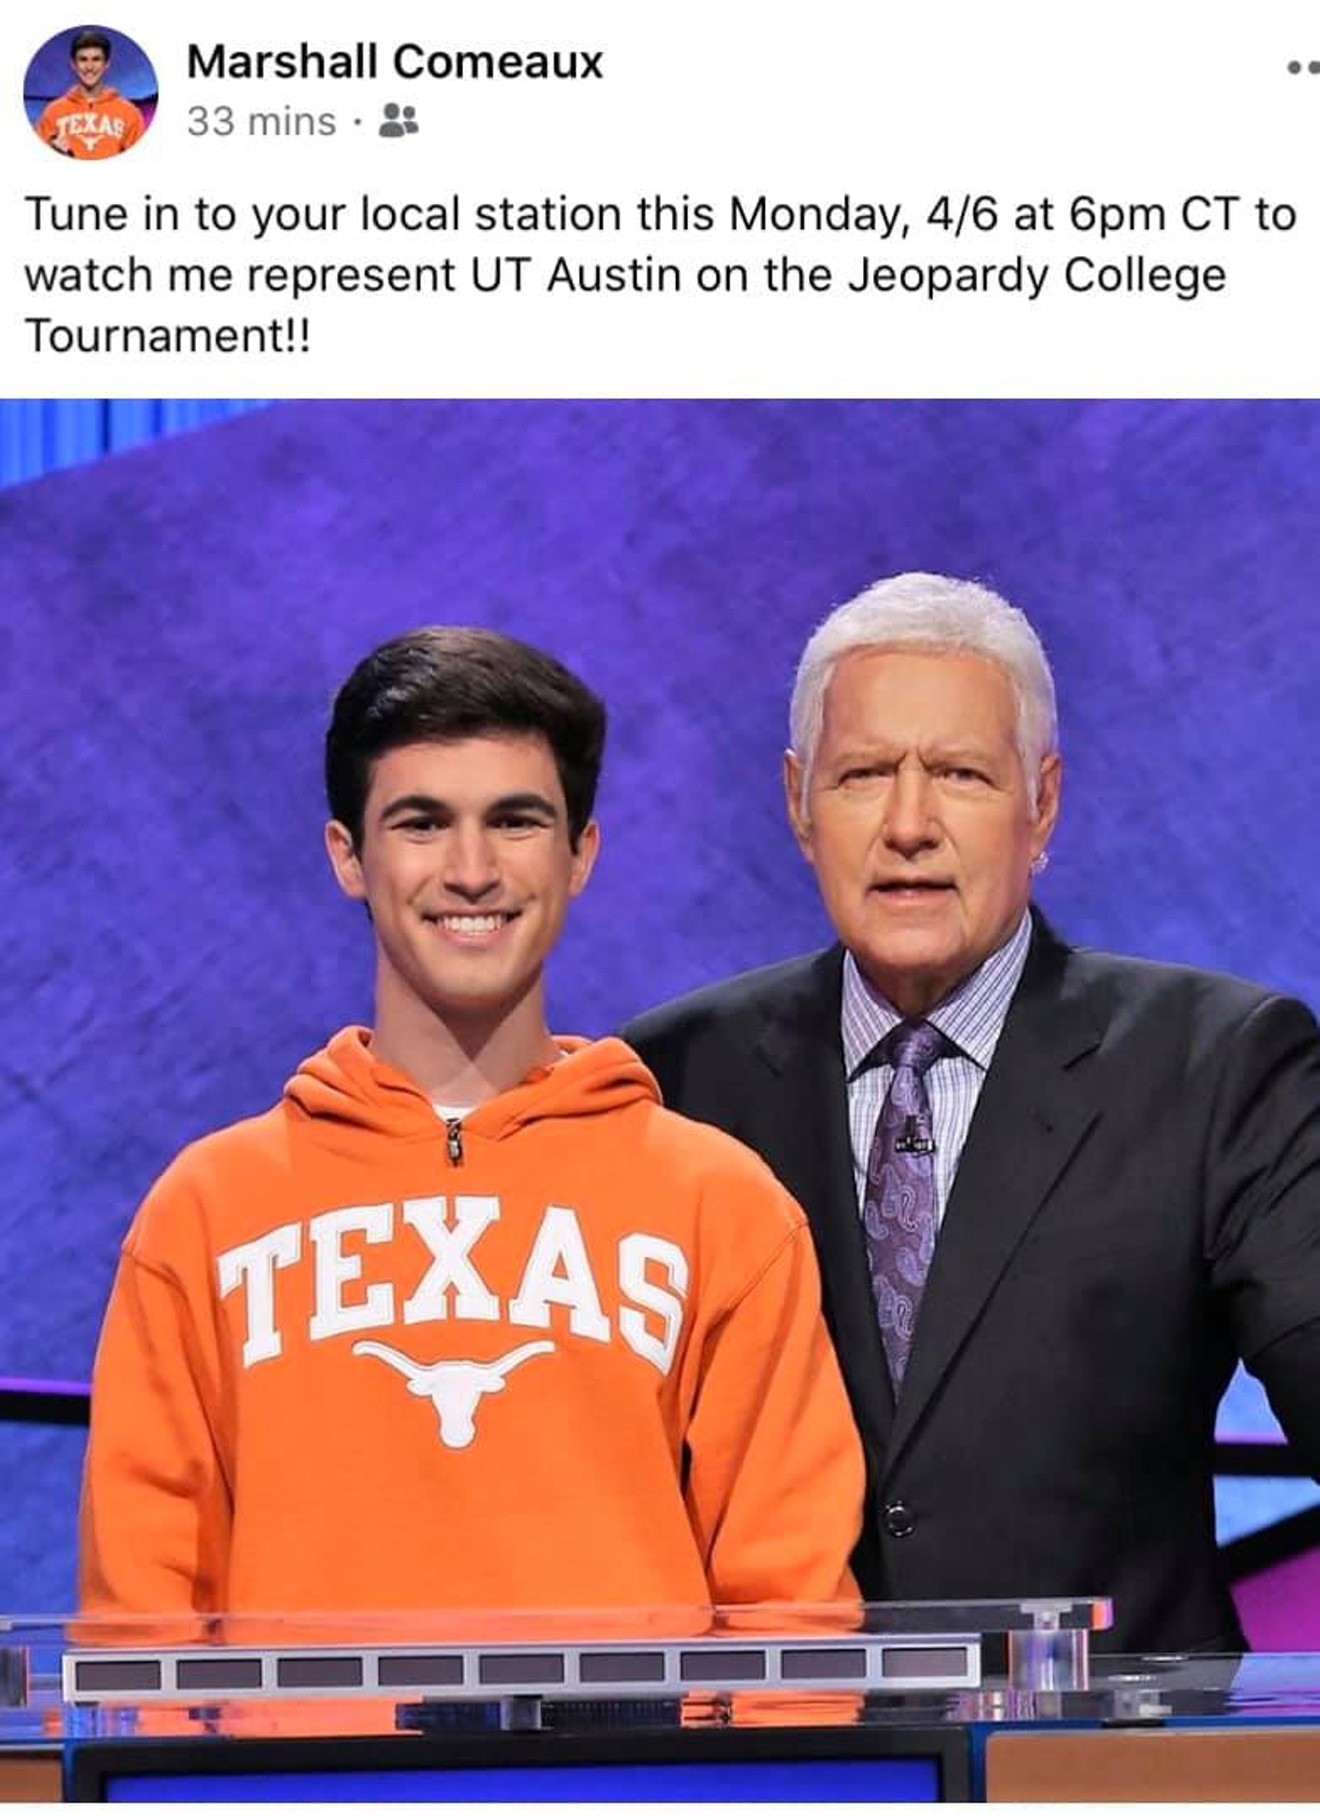 University of Texas at Austin student and North Dallas native Marshall Comeaux (left) with Jeopardy! host Alex Trebek.